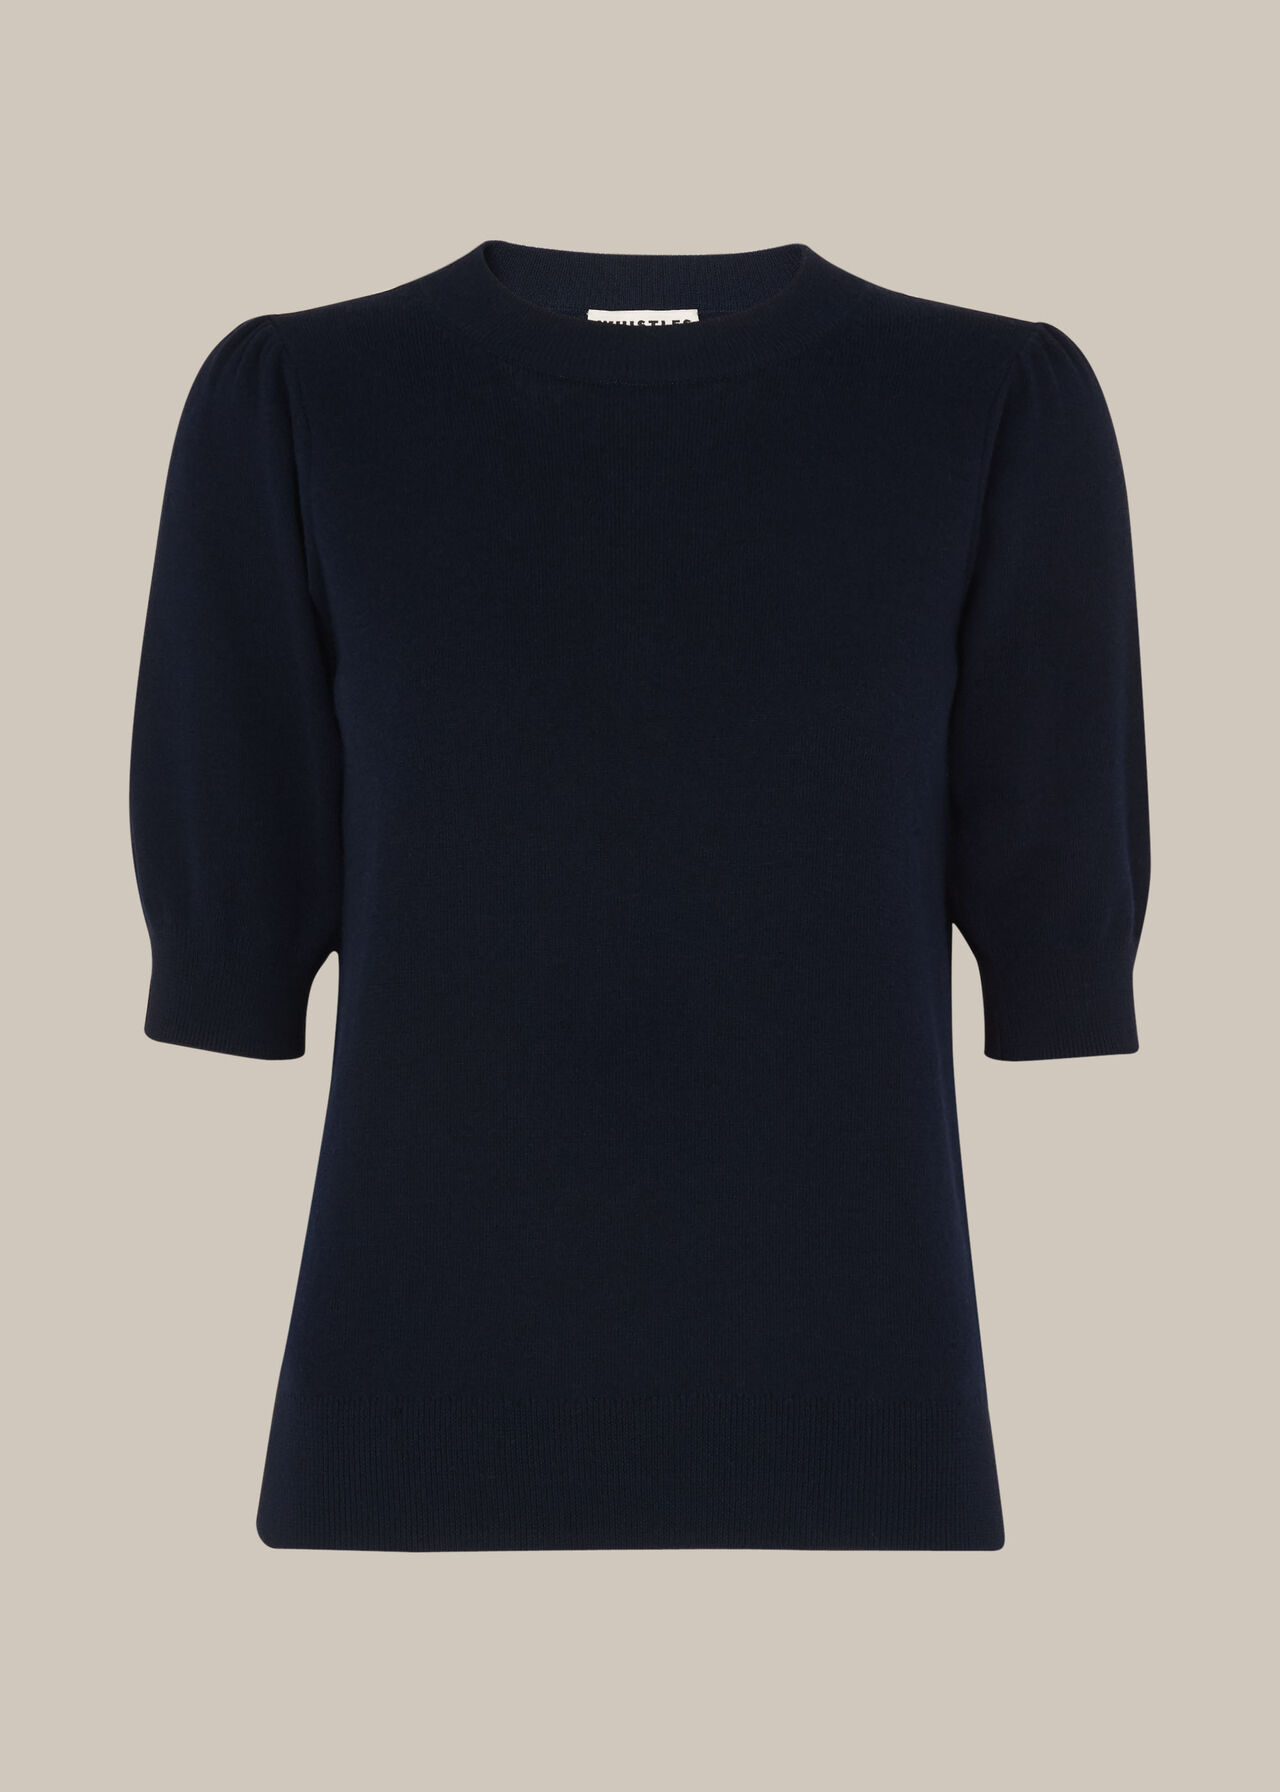 Navy Puff Short Sleeve Knit, WHISTLES